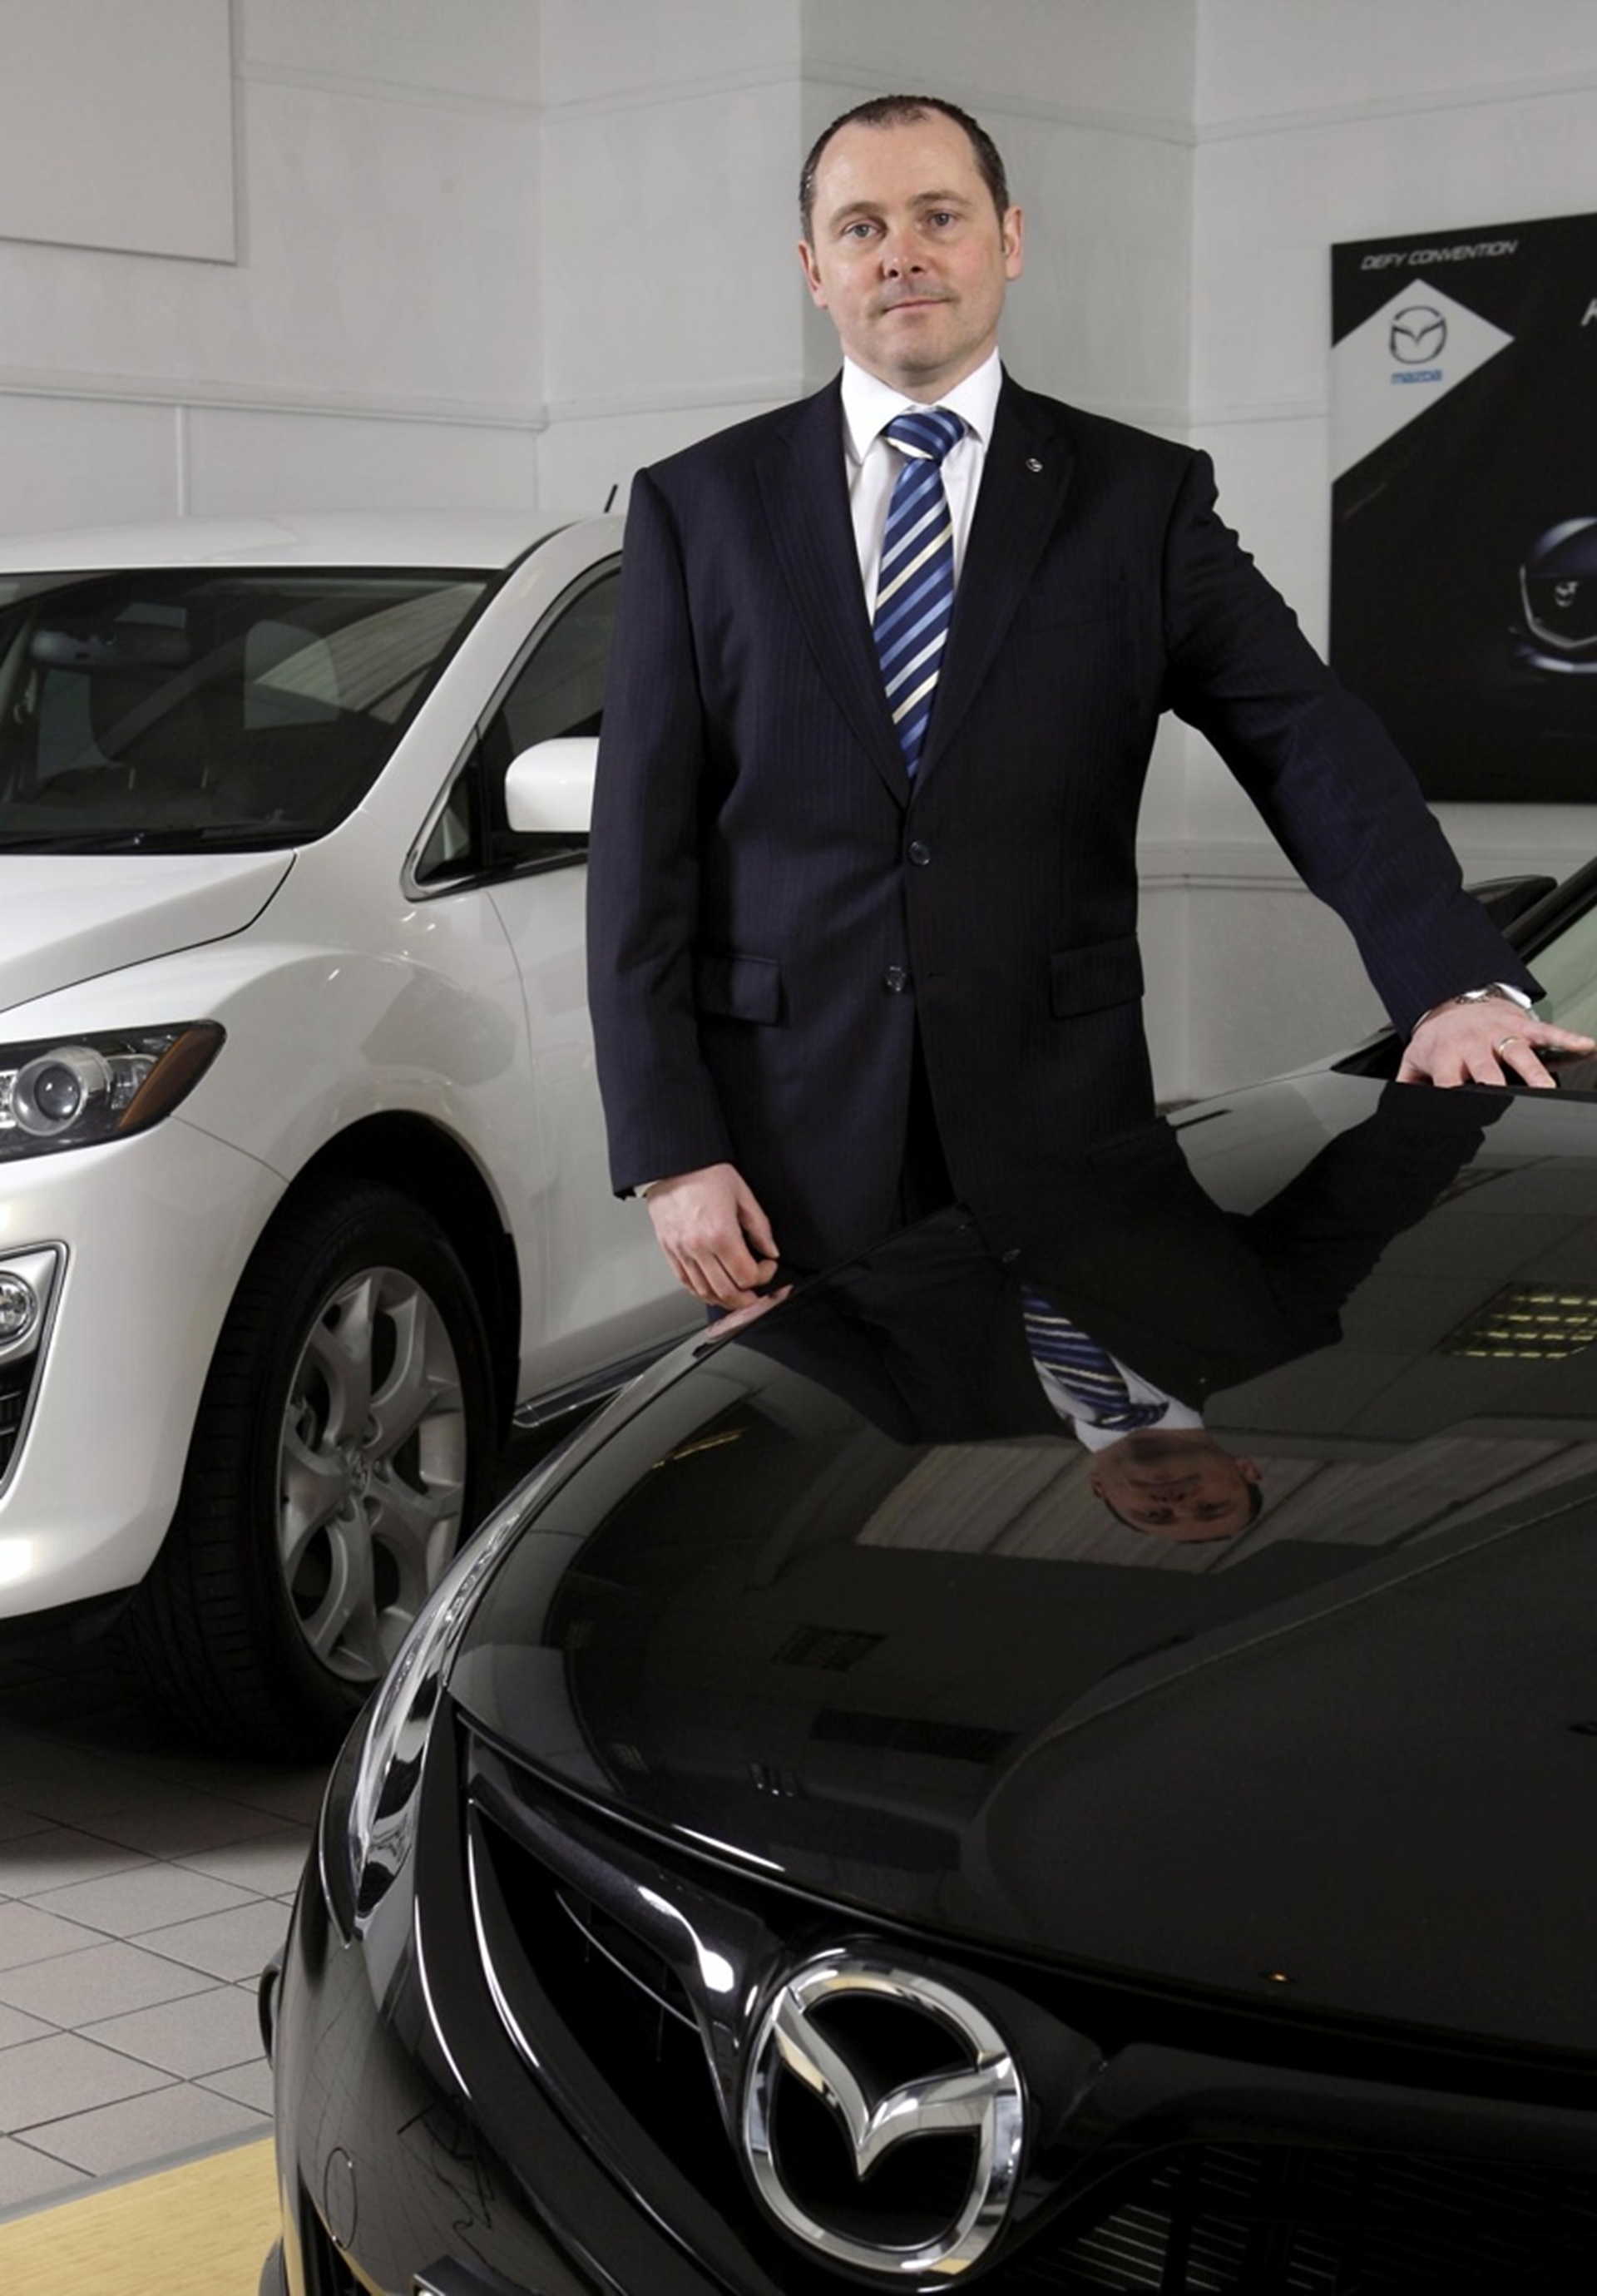 MAZDA OPENS NEW CPM-MANAGED CORPORATE SUPPORT CENTRE